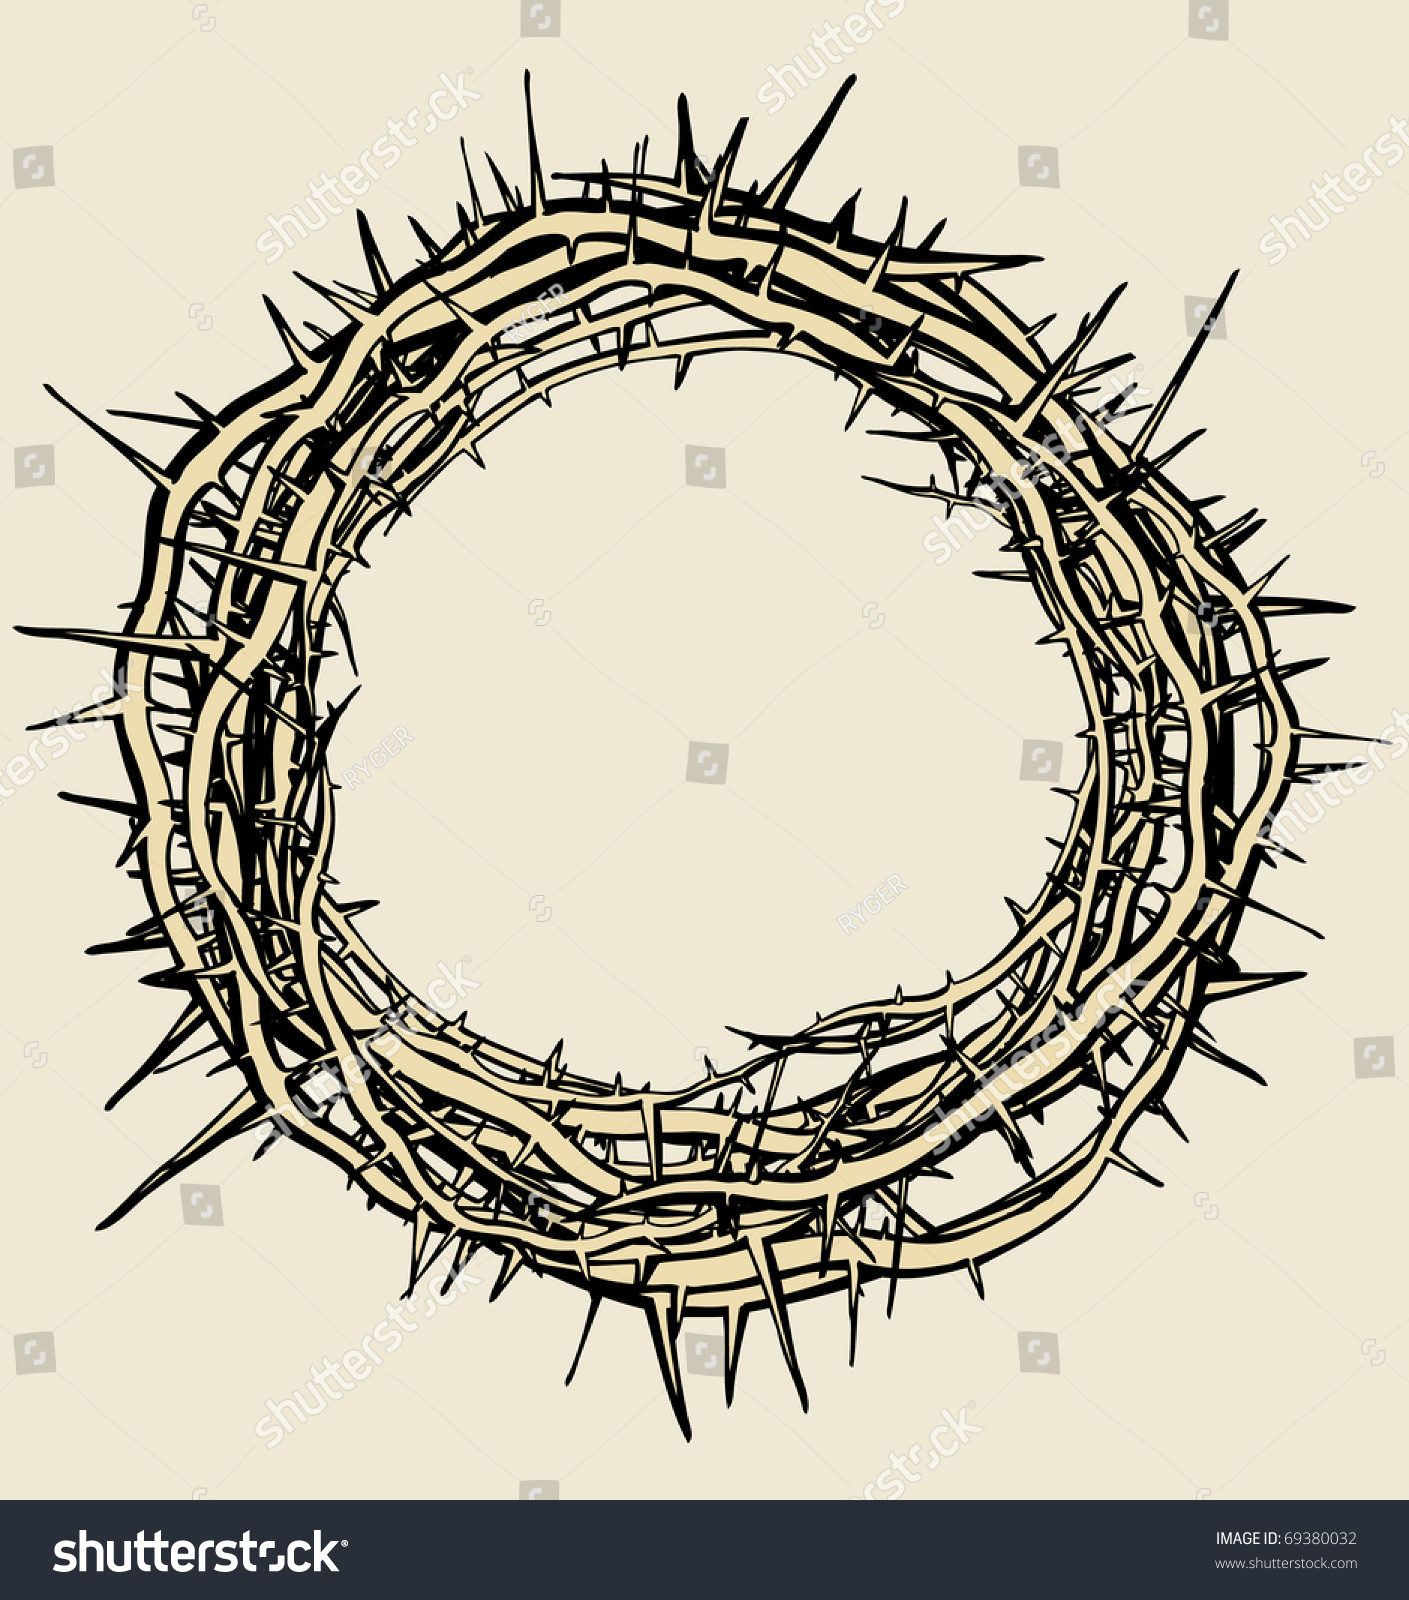 religious clip art crown of thorns - photo #30